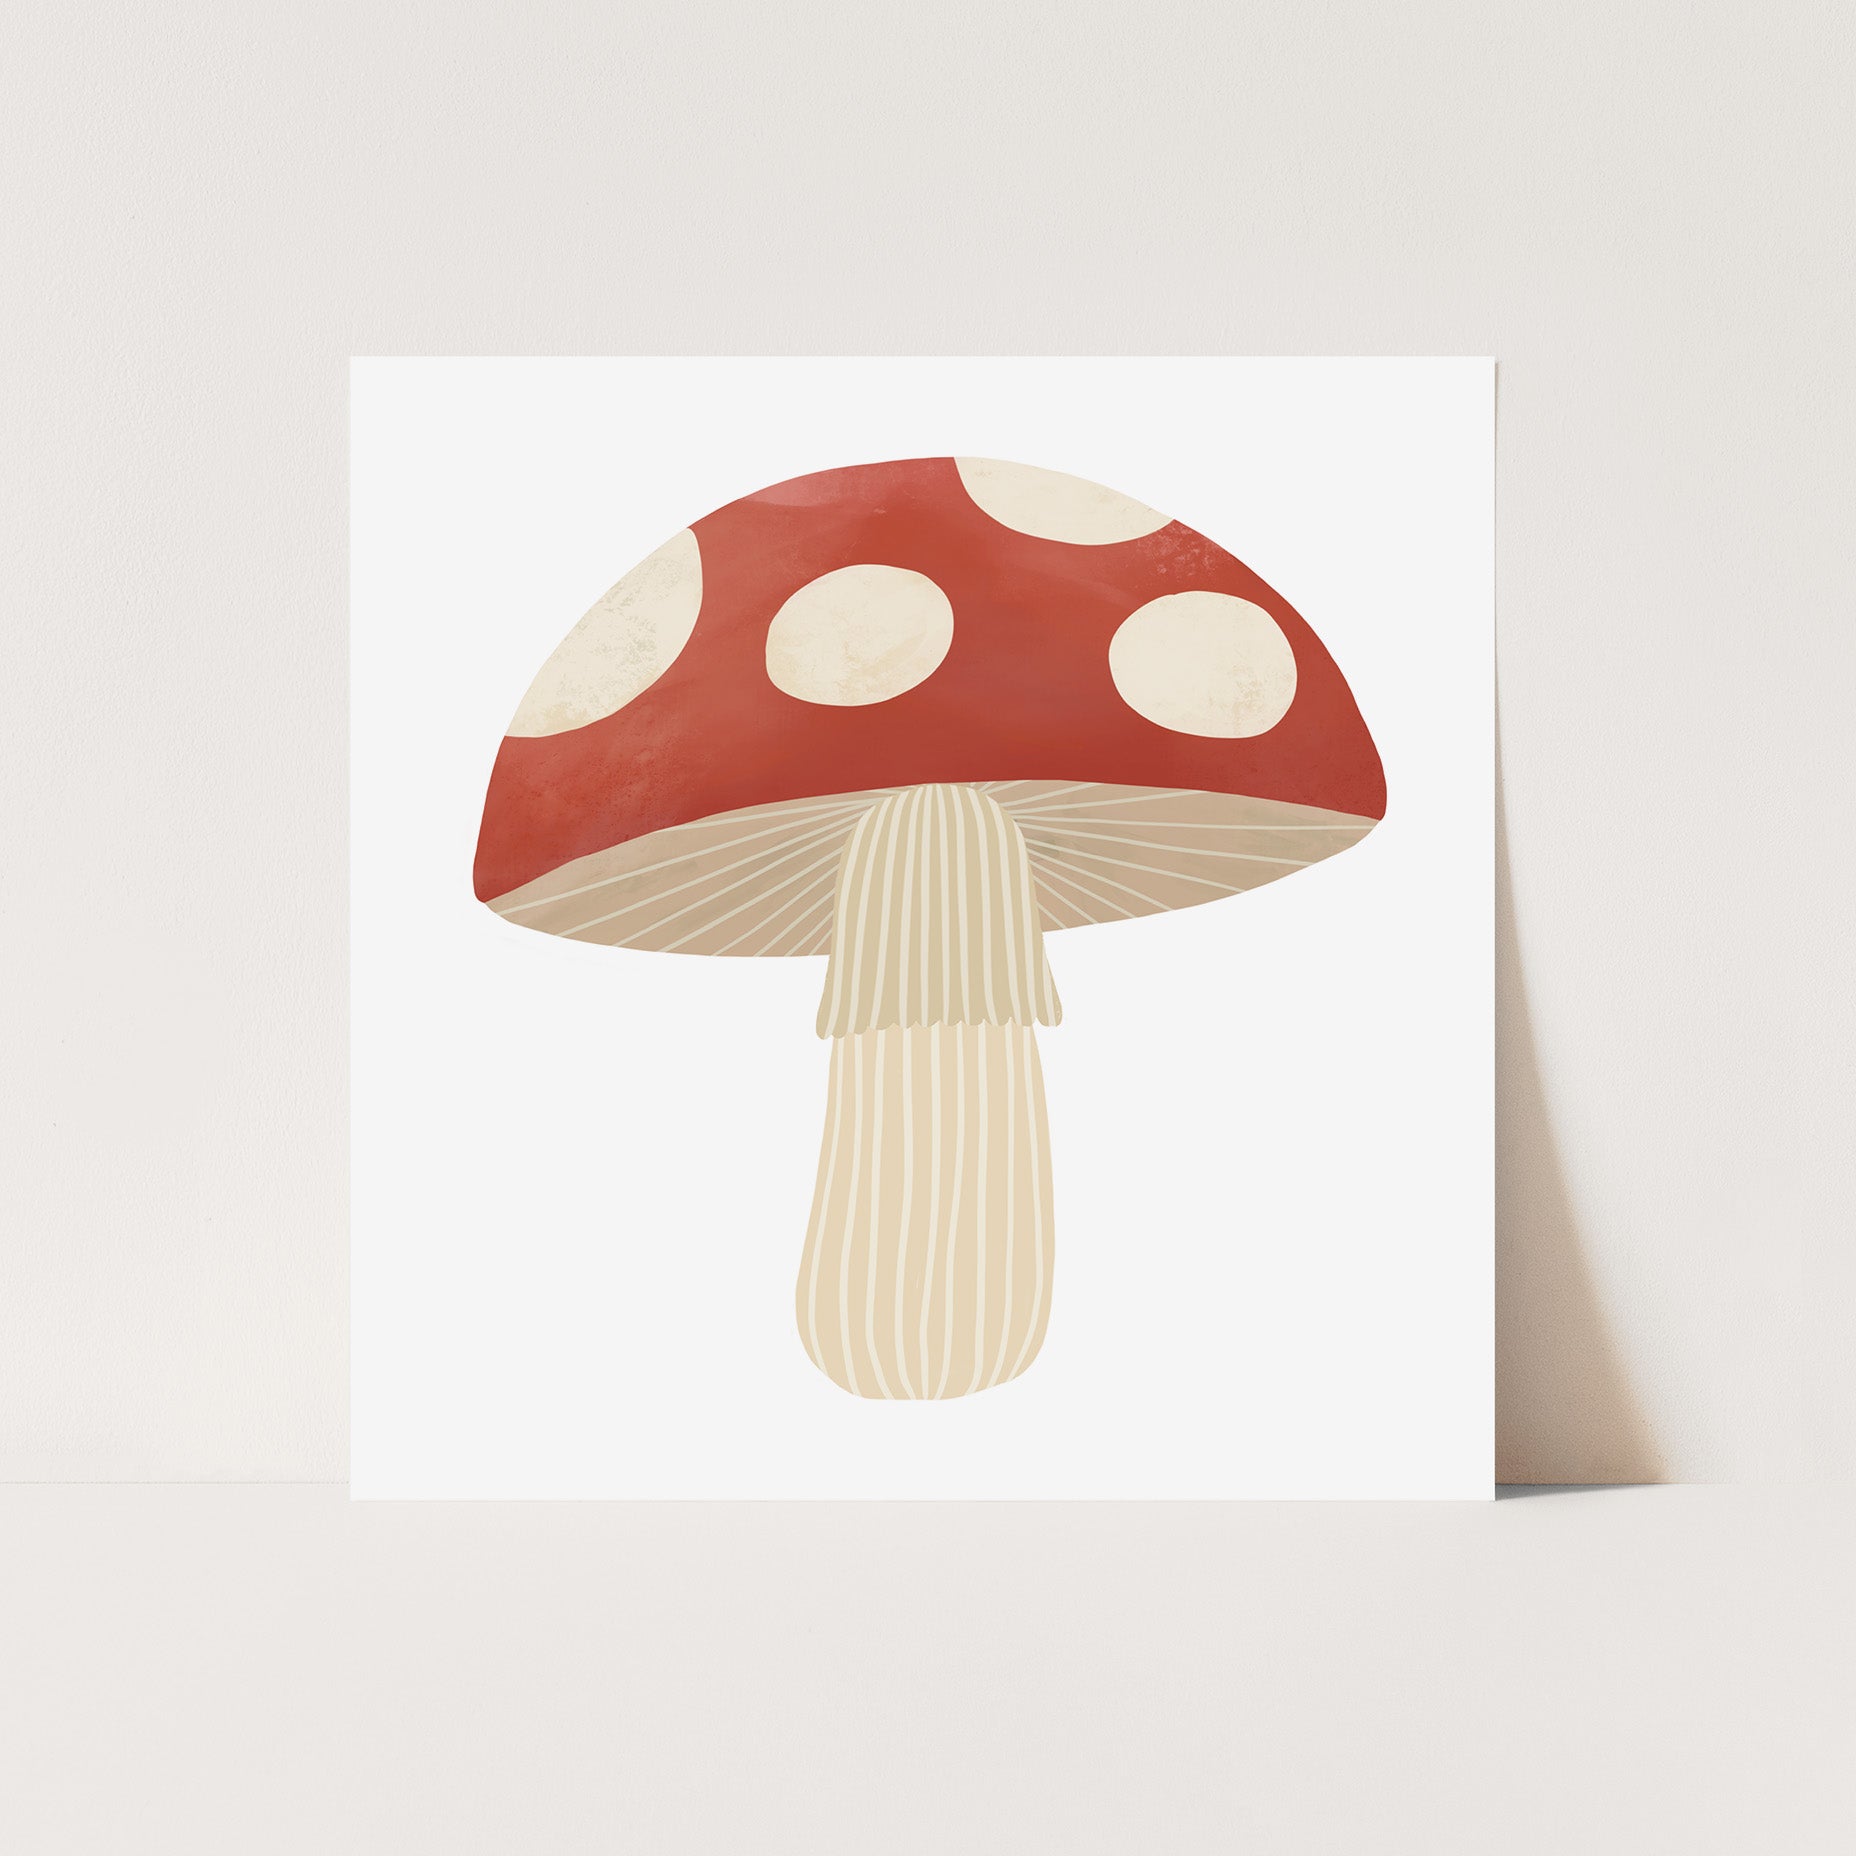 Mushroom Art Print by Kid of the Village (6 Sizes Available)